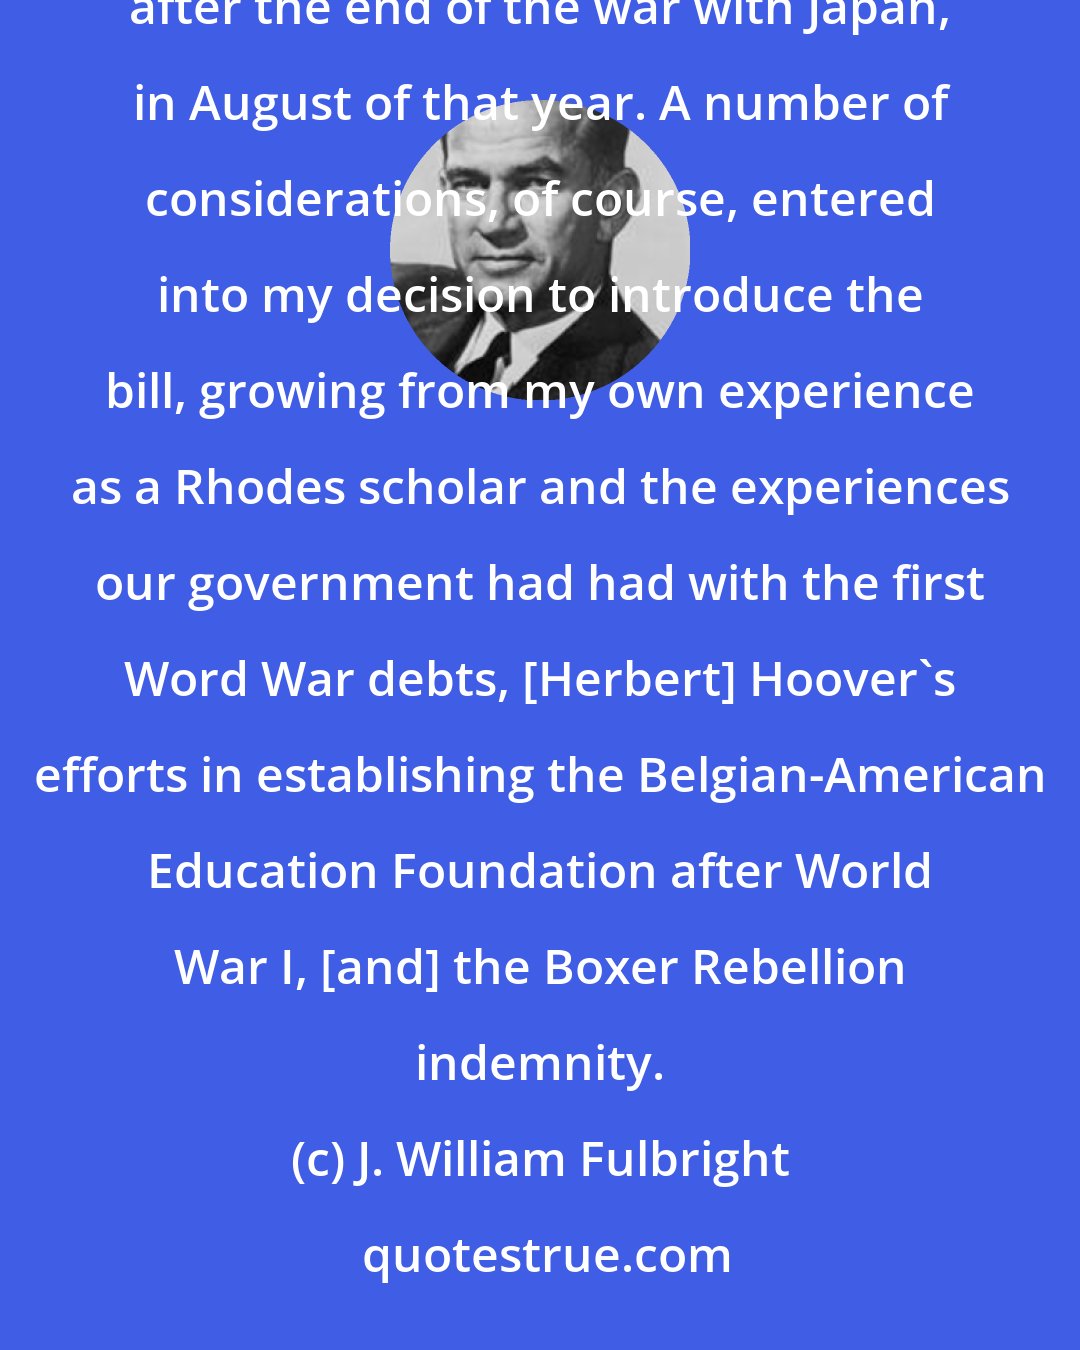 J. William Fulbright: With respect to the creation of the program, I introduced the bill in September 1945, immediately after the end of the war with Japan, in August of that year. A number of considerations, of course, entered into my decision to introduce the bill, growing from my own experience as a Rhodes scholar and the experiences our government had had with the first Word War debts, [Herbert] Hoover's efforts in establishing the Belgian-American Education Foundation after World War I, [and] the Boxer Rebellion indemnity.